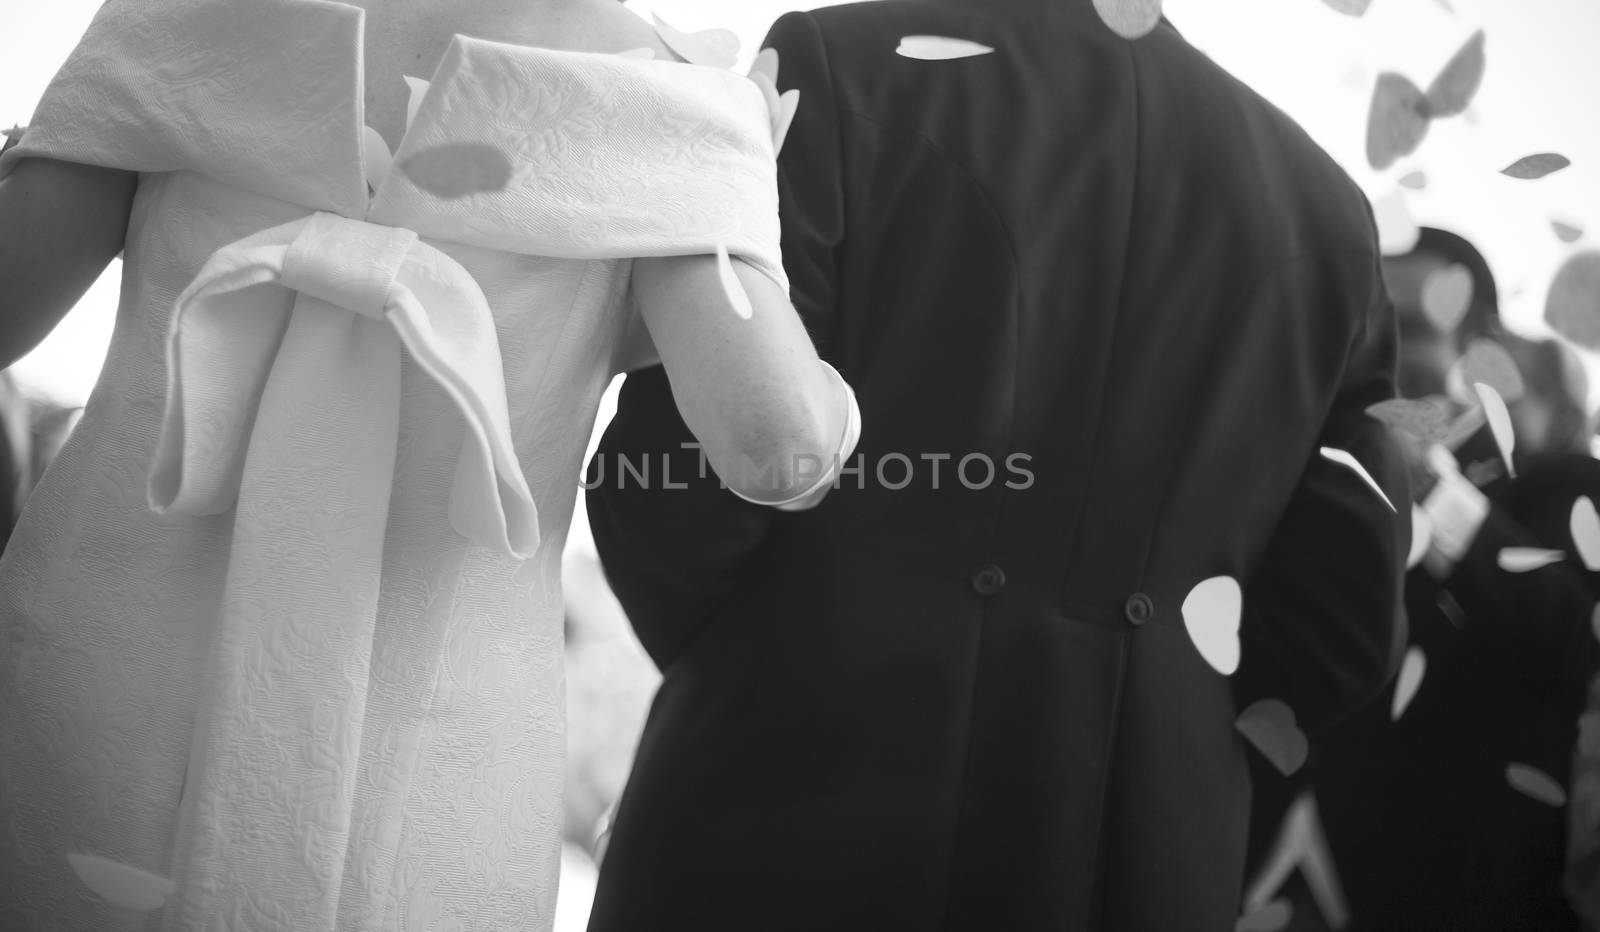 Black and white artistic digital photo of bridegroom in dark suit and white shirt in wedding marriage holding hands with the bride in white long wedding bridal dress. Shallow depth of with background out of focus. 